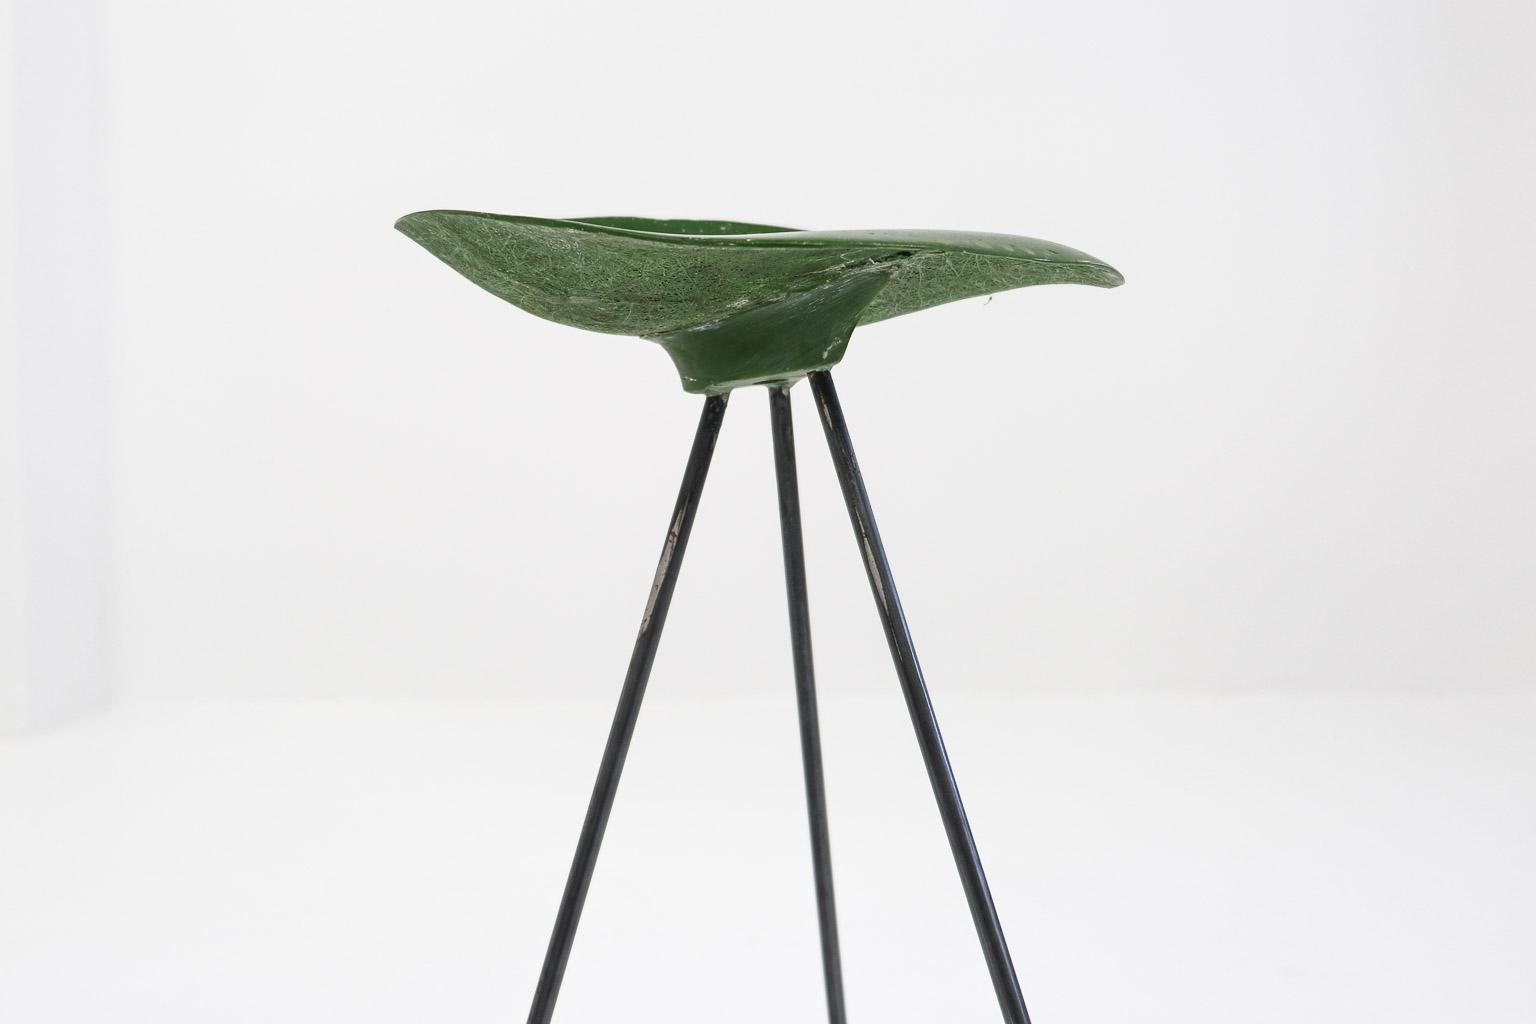 French Tripod stool by Jean Raymond Picard/Jean-René Picard for S.E.T.A., France, 1955 For Sale